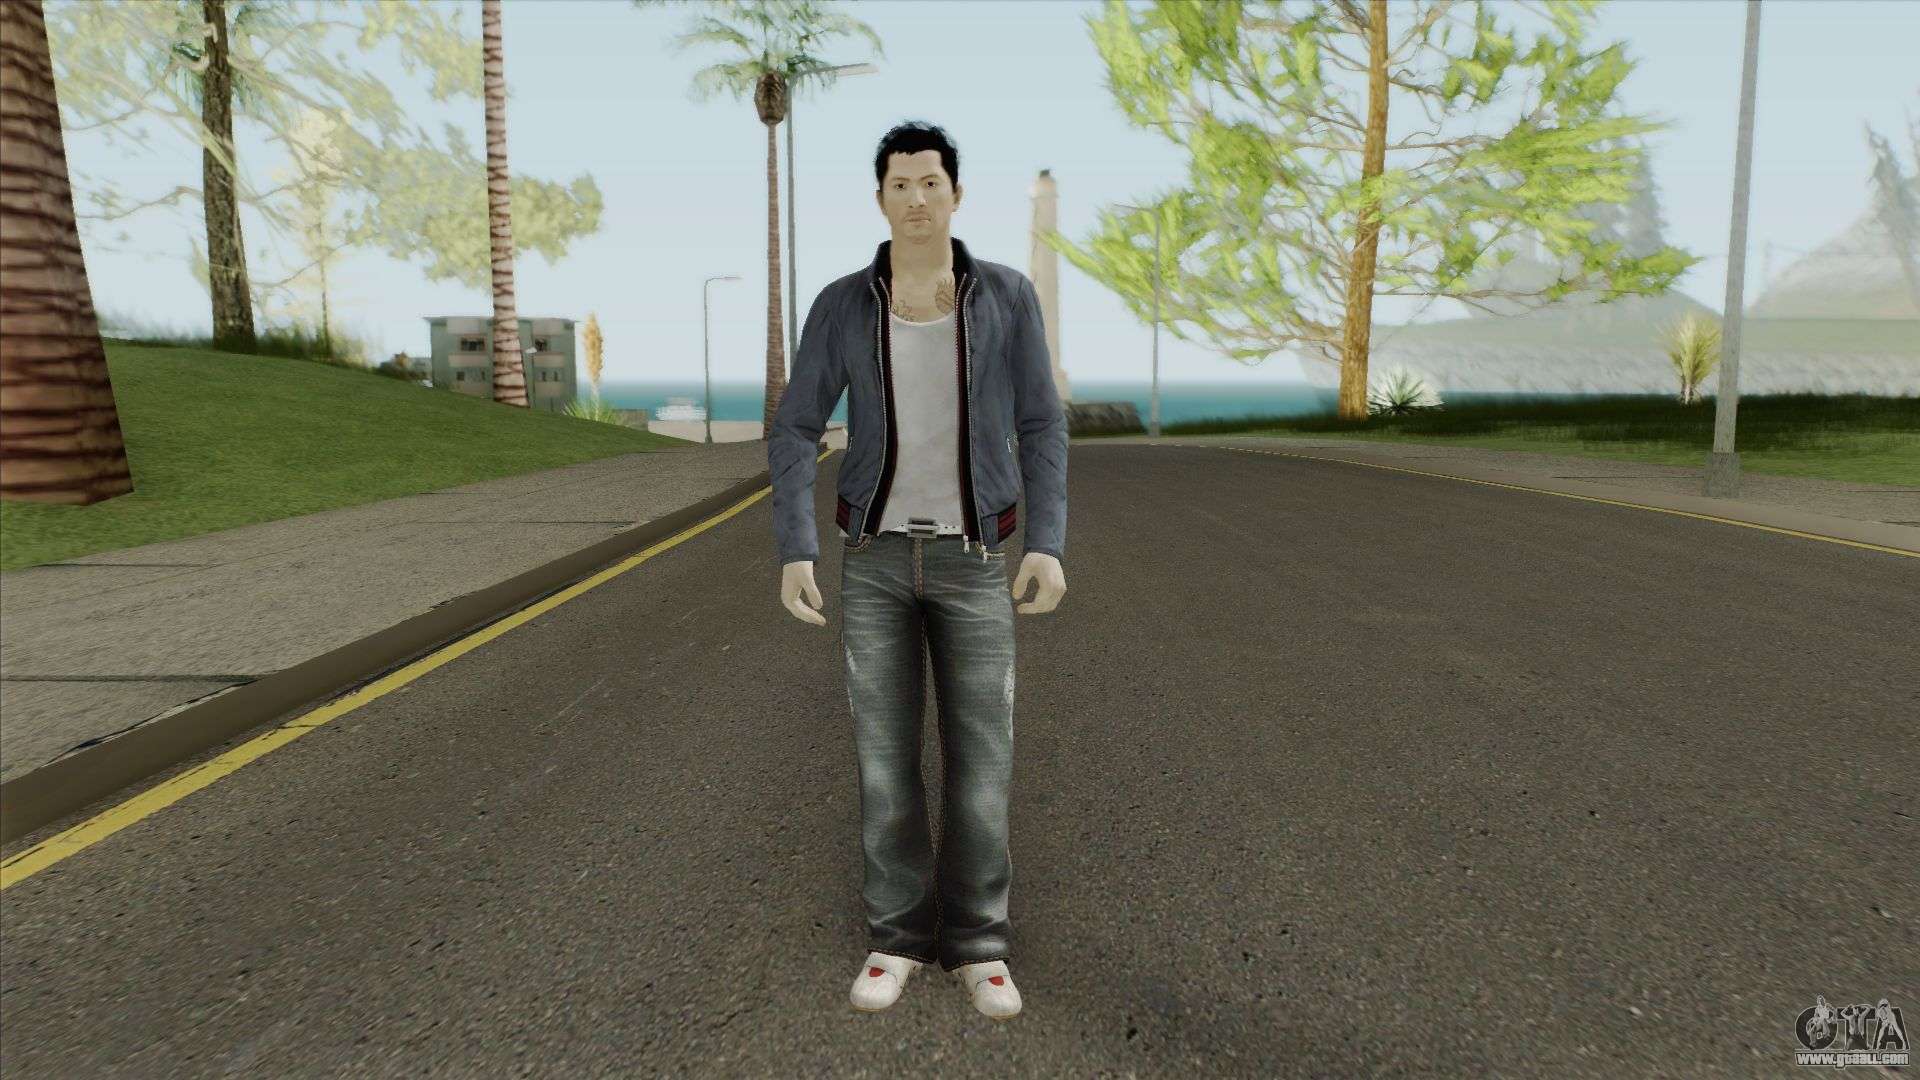 Download Sandra from the game Sleeping Dogs for GTA San Andreas